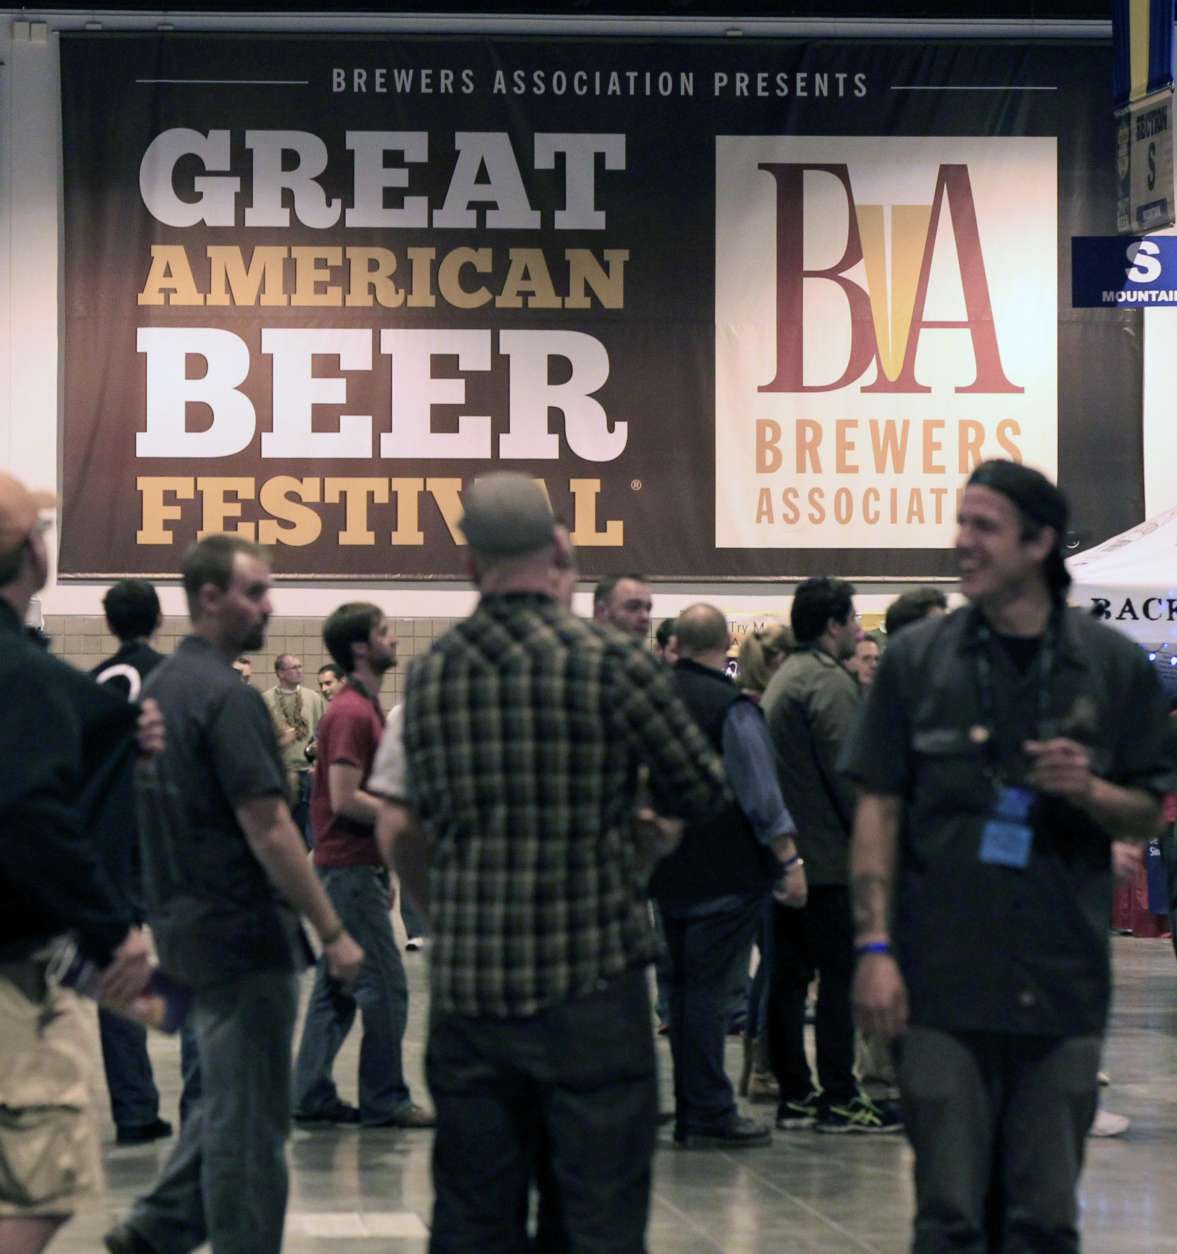 Attendees pass beneath sign at the Great American Beer Festival in the Colorado Convention Center in Denver on Friday, Oct. 12, 2012. Craft beer brewers from around the country have descended on Denver to offer their wares to festival goers as well as take part in competitions. (AP Photo/David Zalubowski)